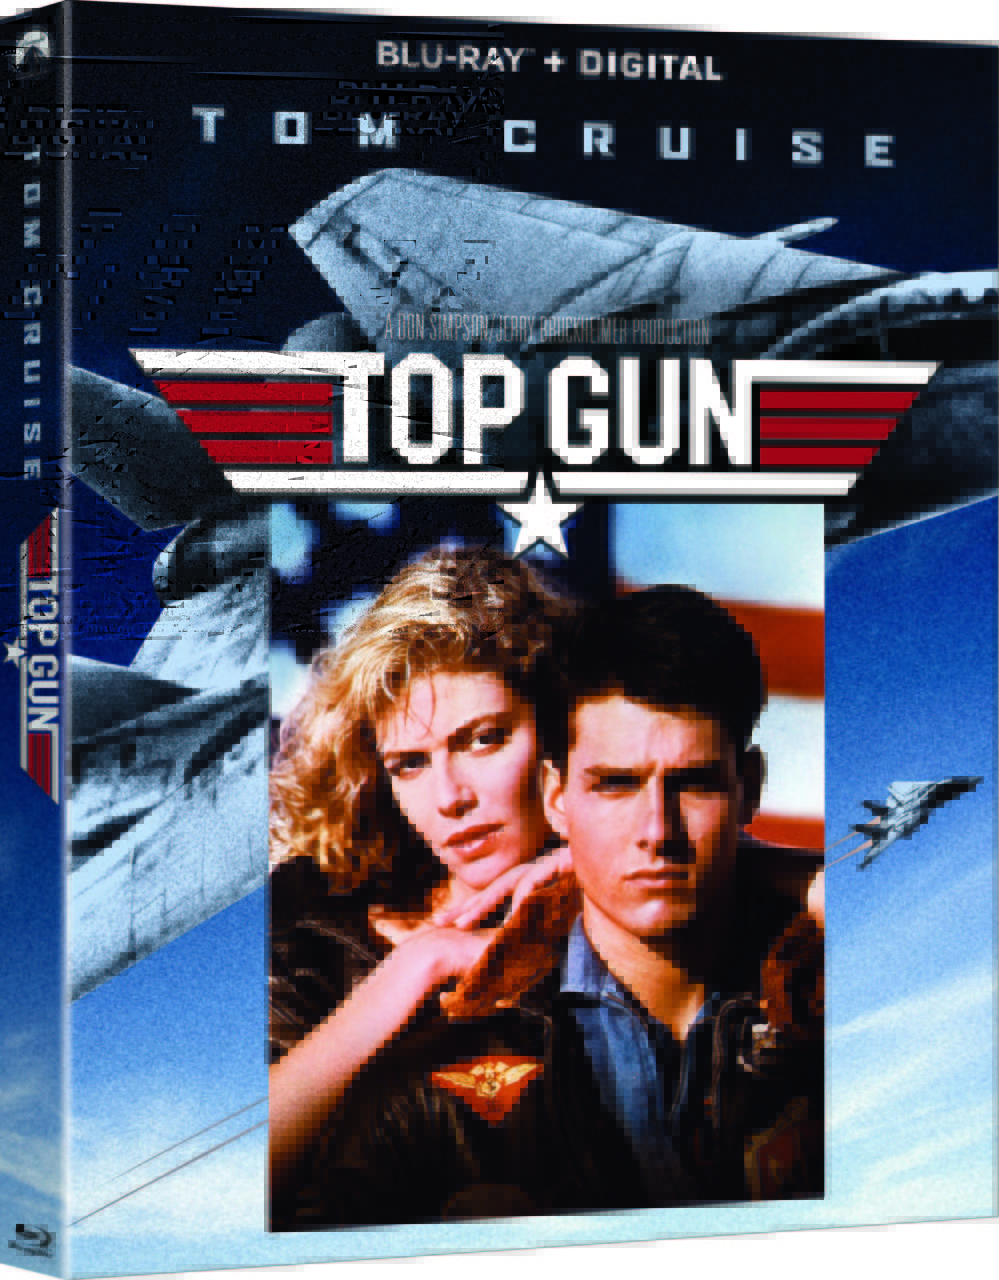 Top Gun Blu-Ray Combo Pack cover (Paramount Home Entertainment)